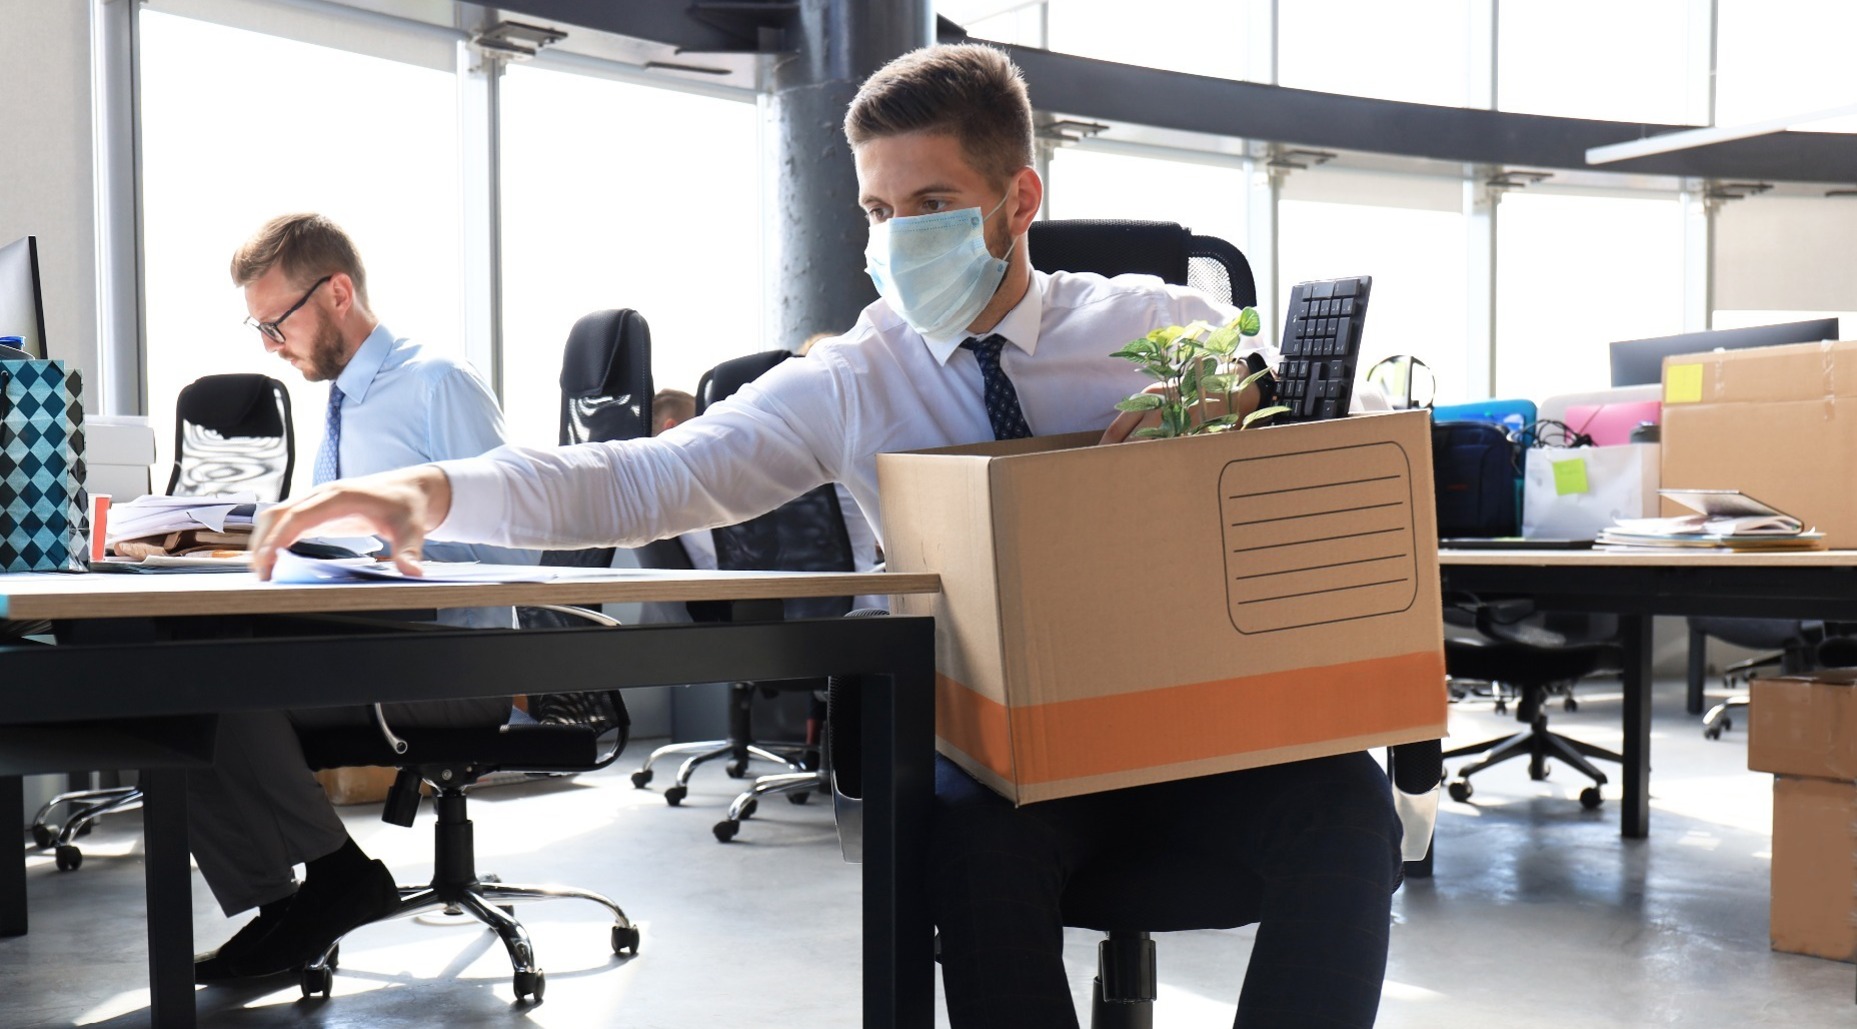 Man wearing a face mask emptying his desk contents into a cardboard box